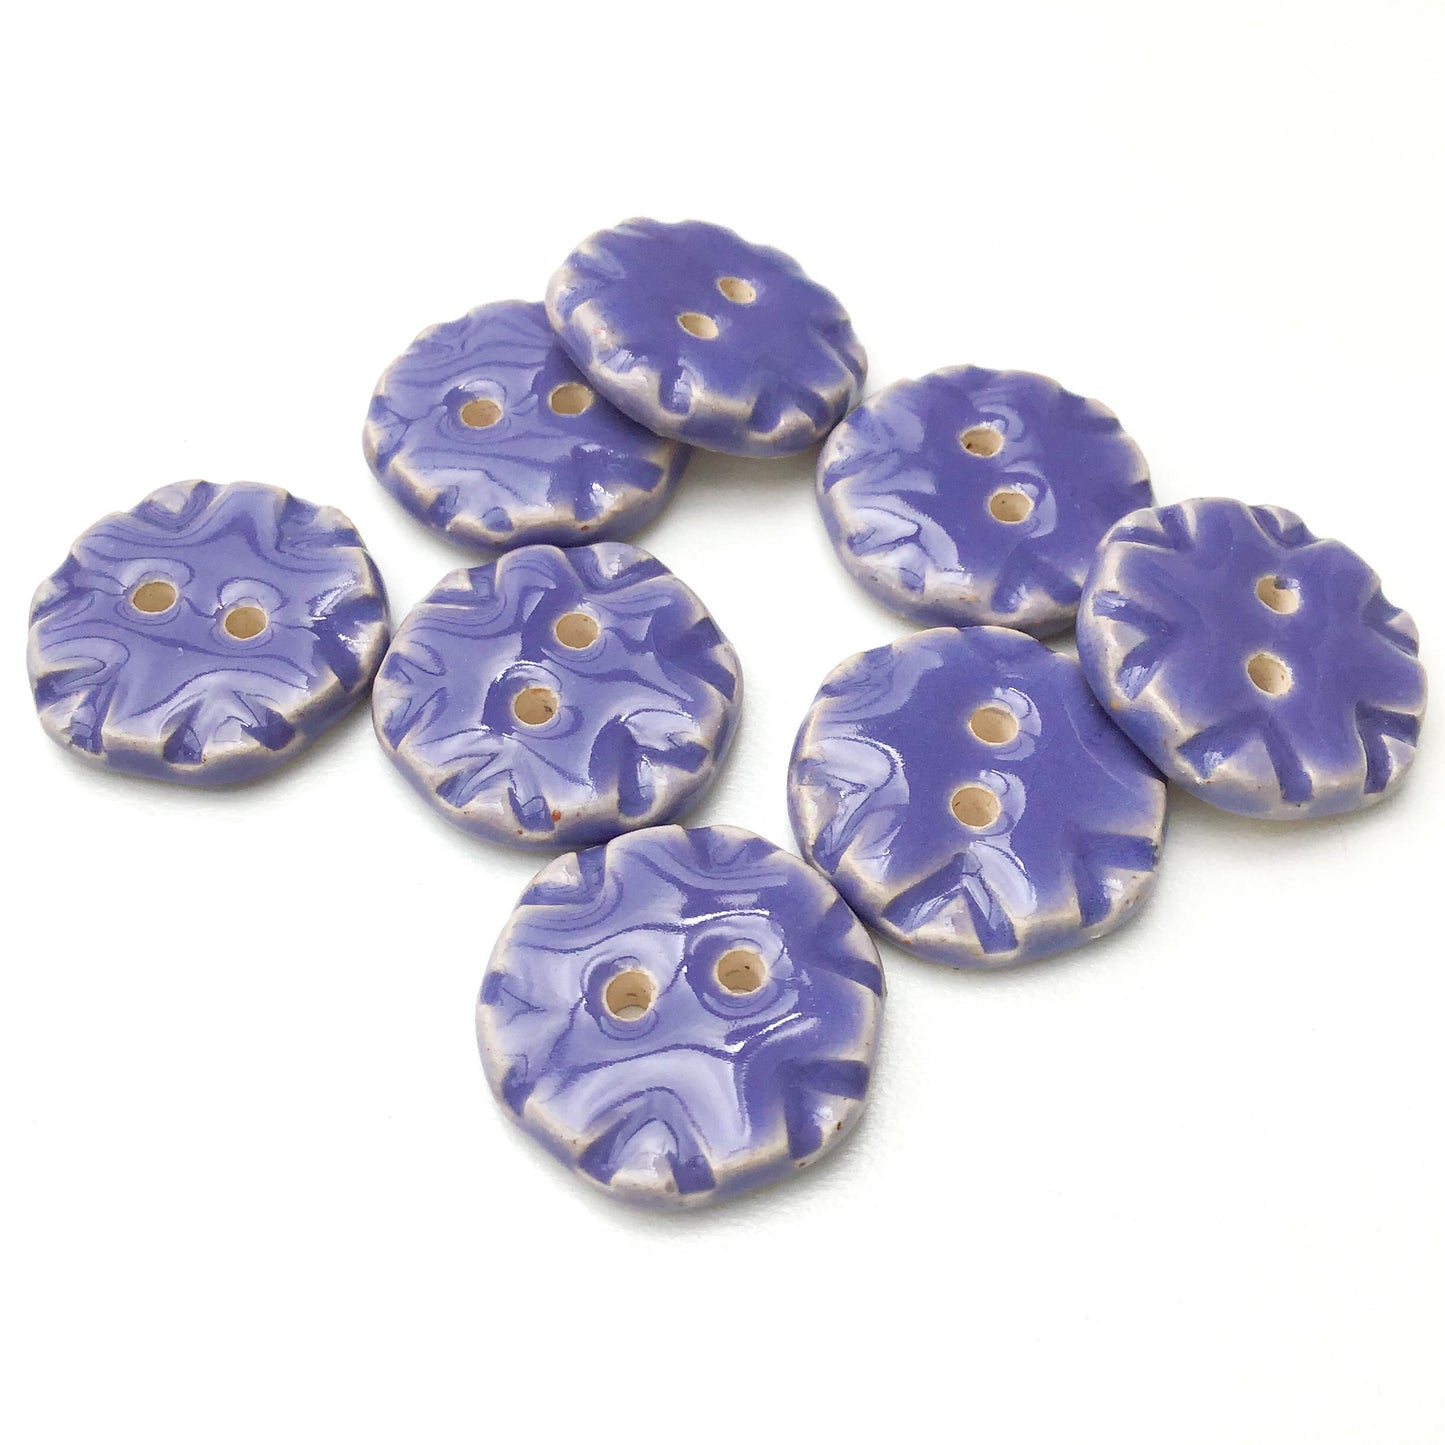 Purple Ceramic Buttons with Stamped Pattern - Decorative Clay Buttons - 3/4" - 8 Pack